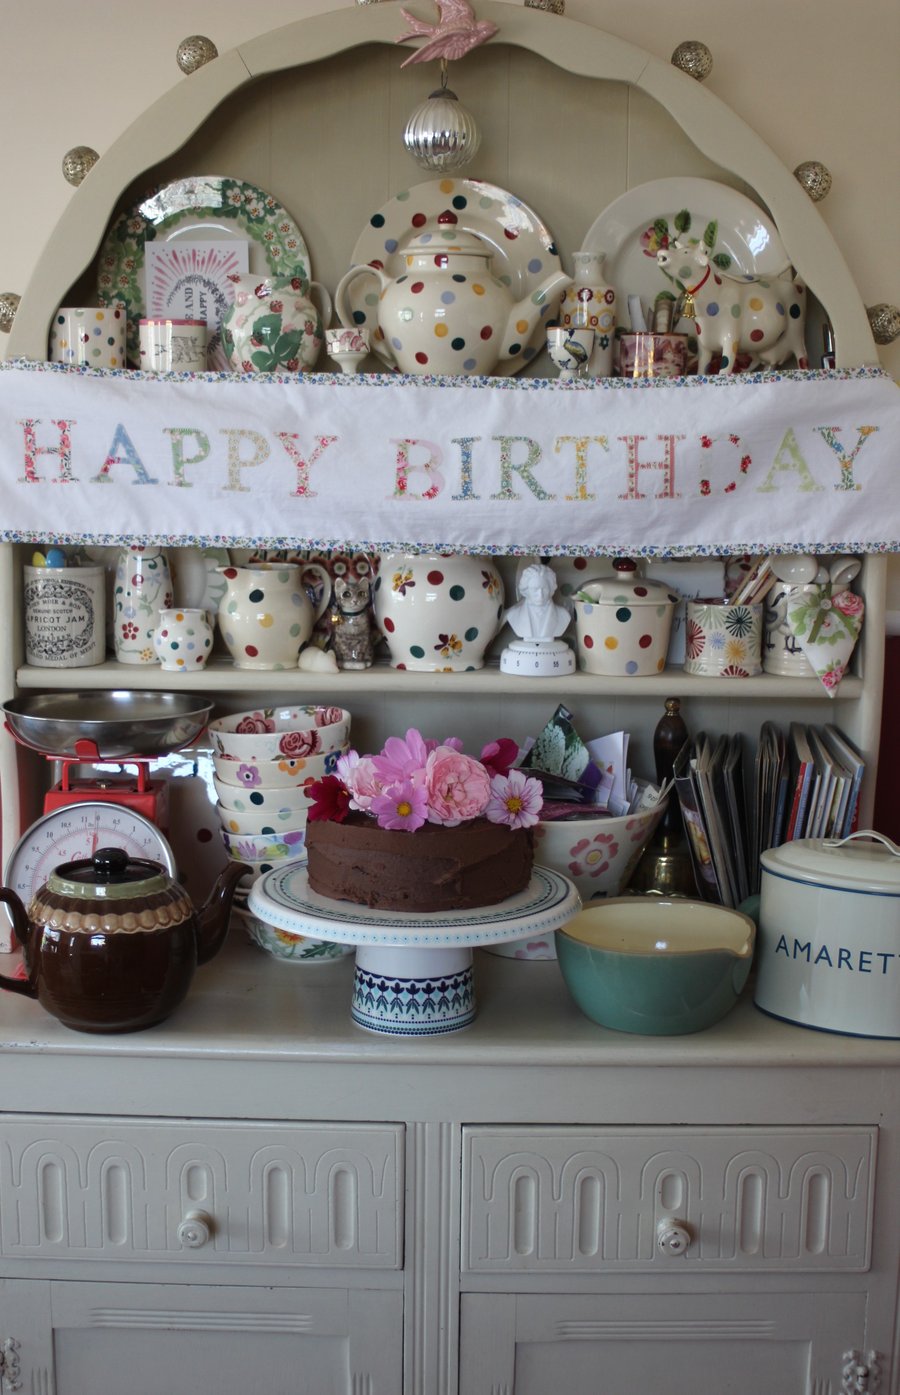 Floral 'Pastels' Happy Birthday fabric banner